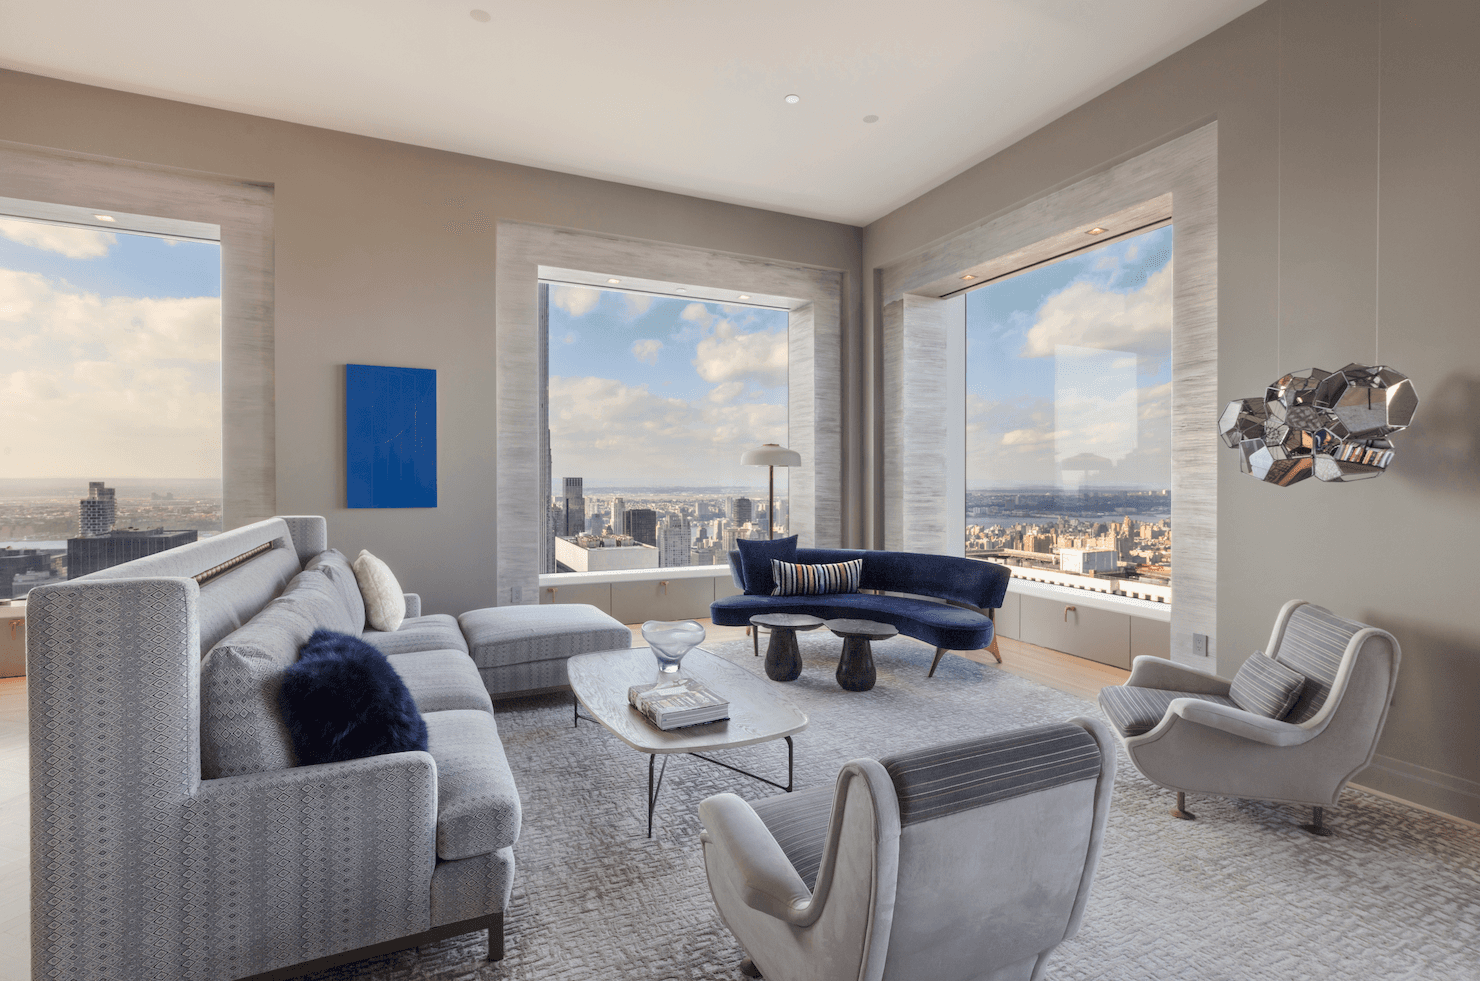 INVESTORS ONLY. Towering 96 stories at a prized Park Avenue address between 56th and 57th Streets, sits an incredibly striking, unparalleled luxury condominium in one of the tallest residential buildings ...